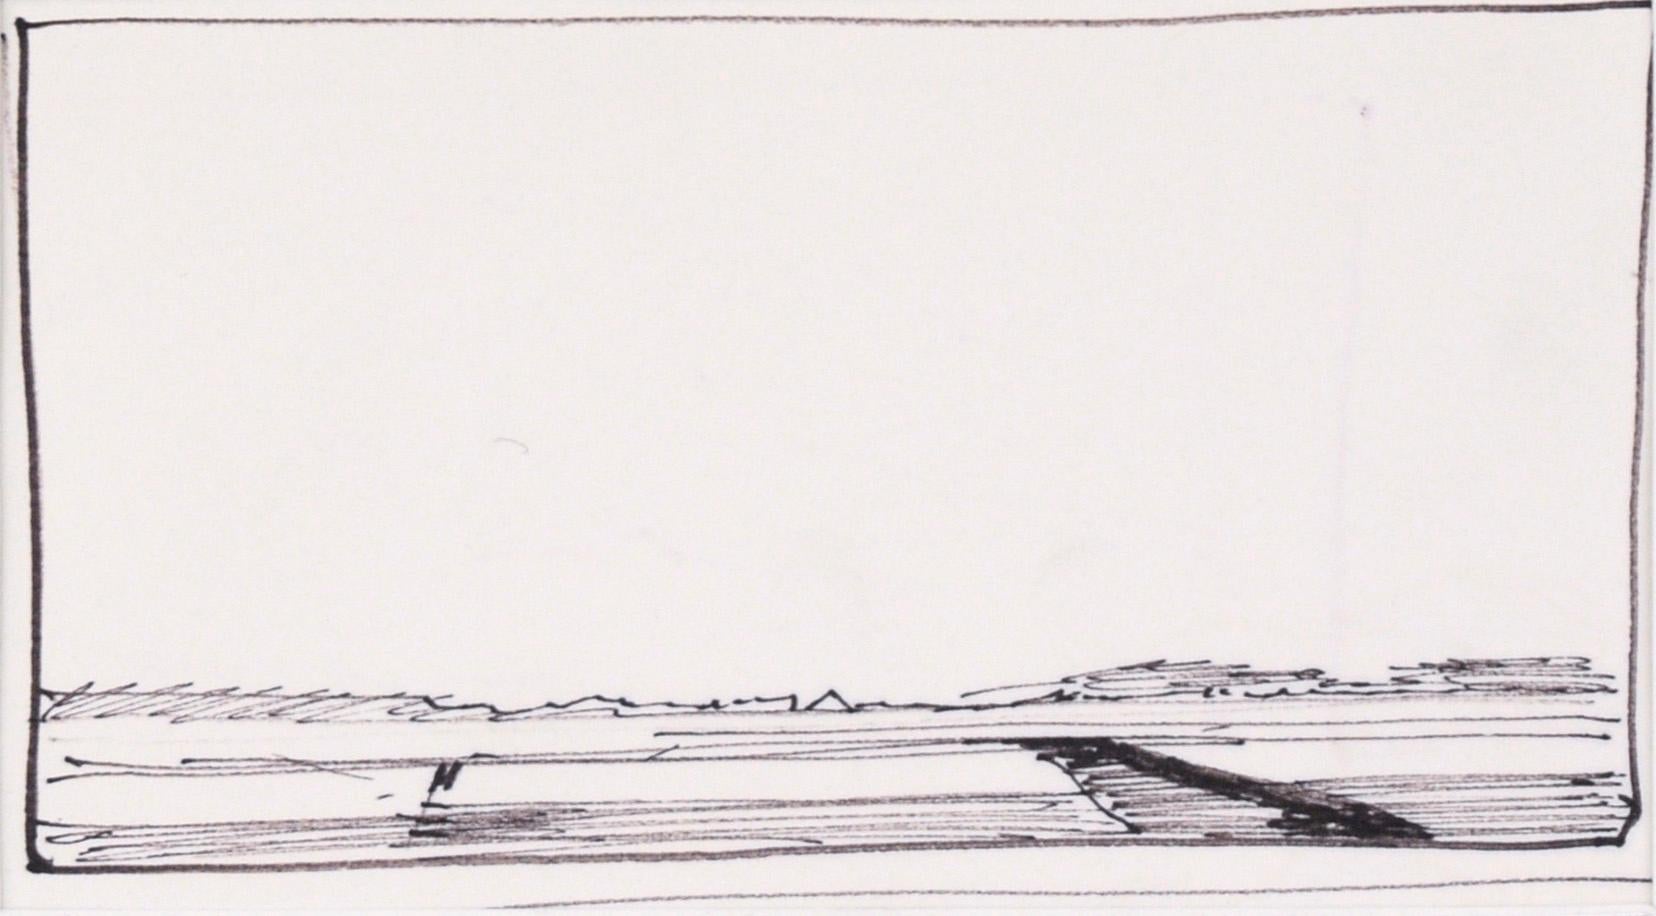 A Cloudless Sky - Line Drawing Landscape in Ink on Paper - American Impressionist Art by Laurence Sisson